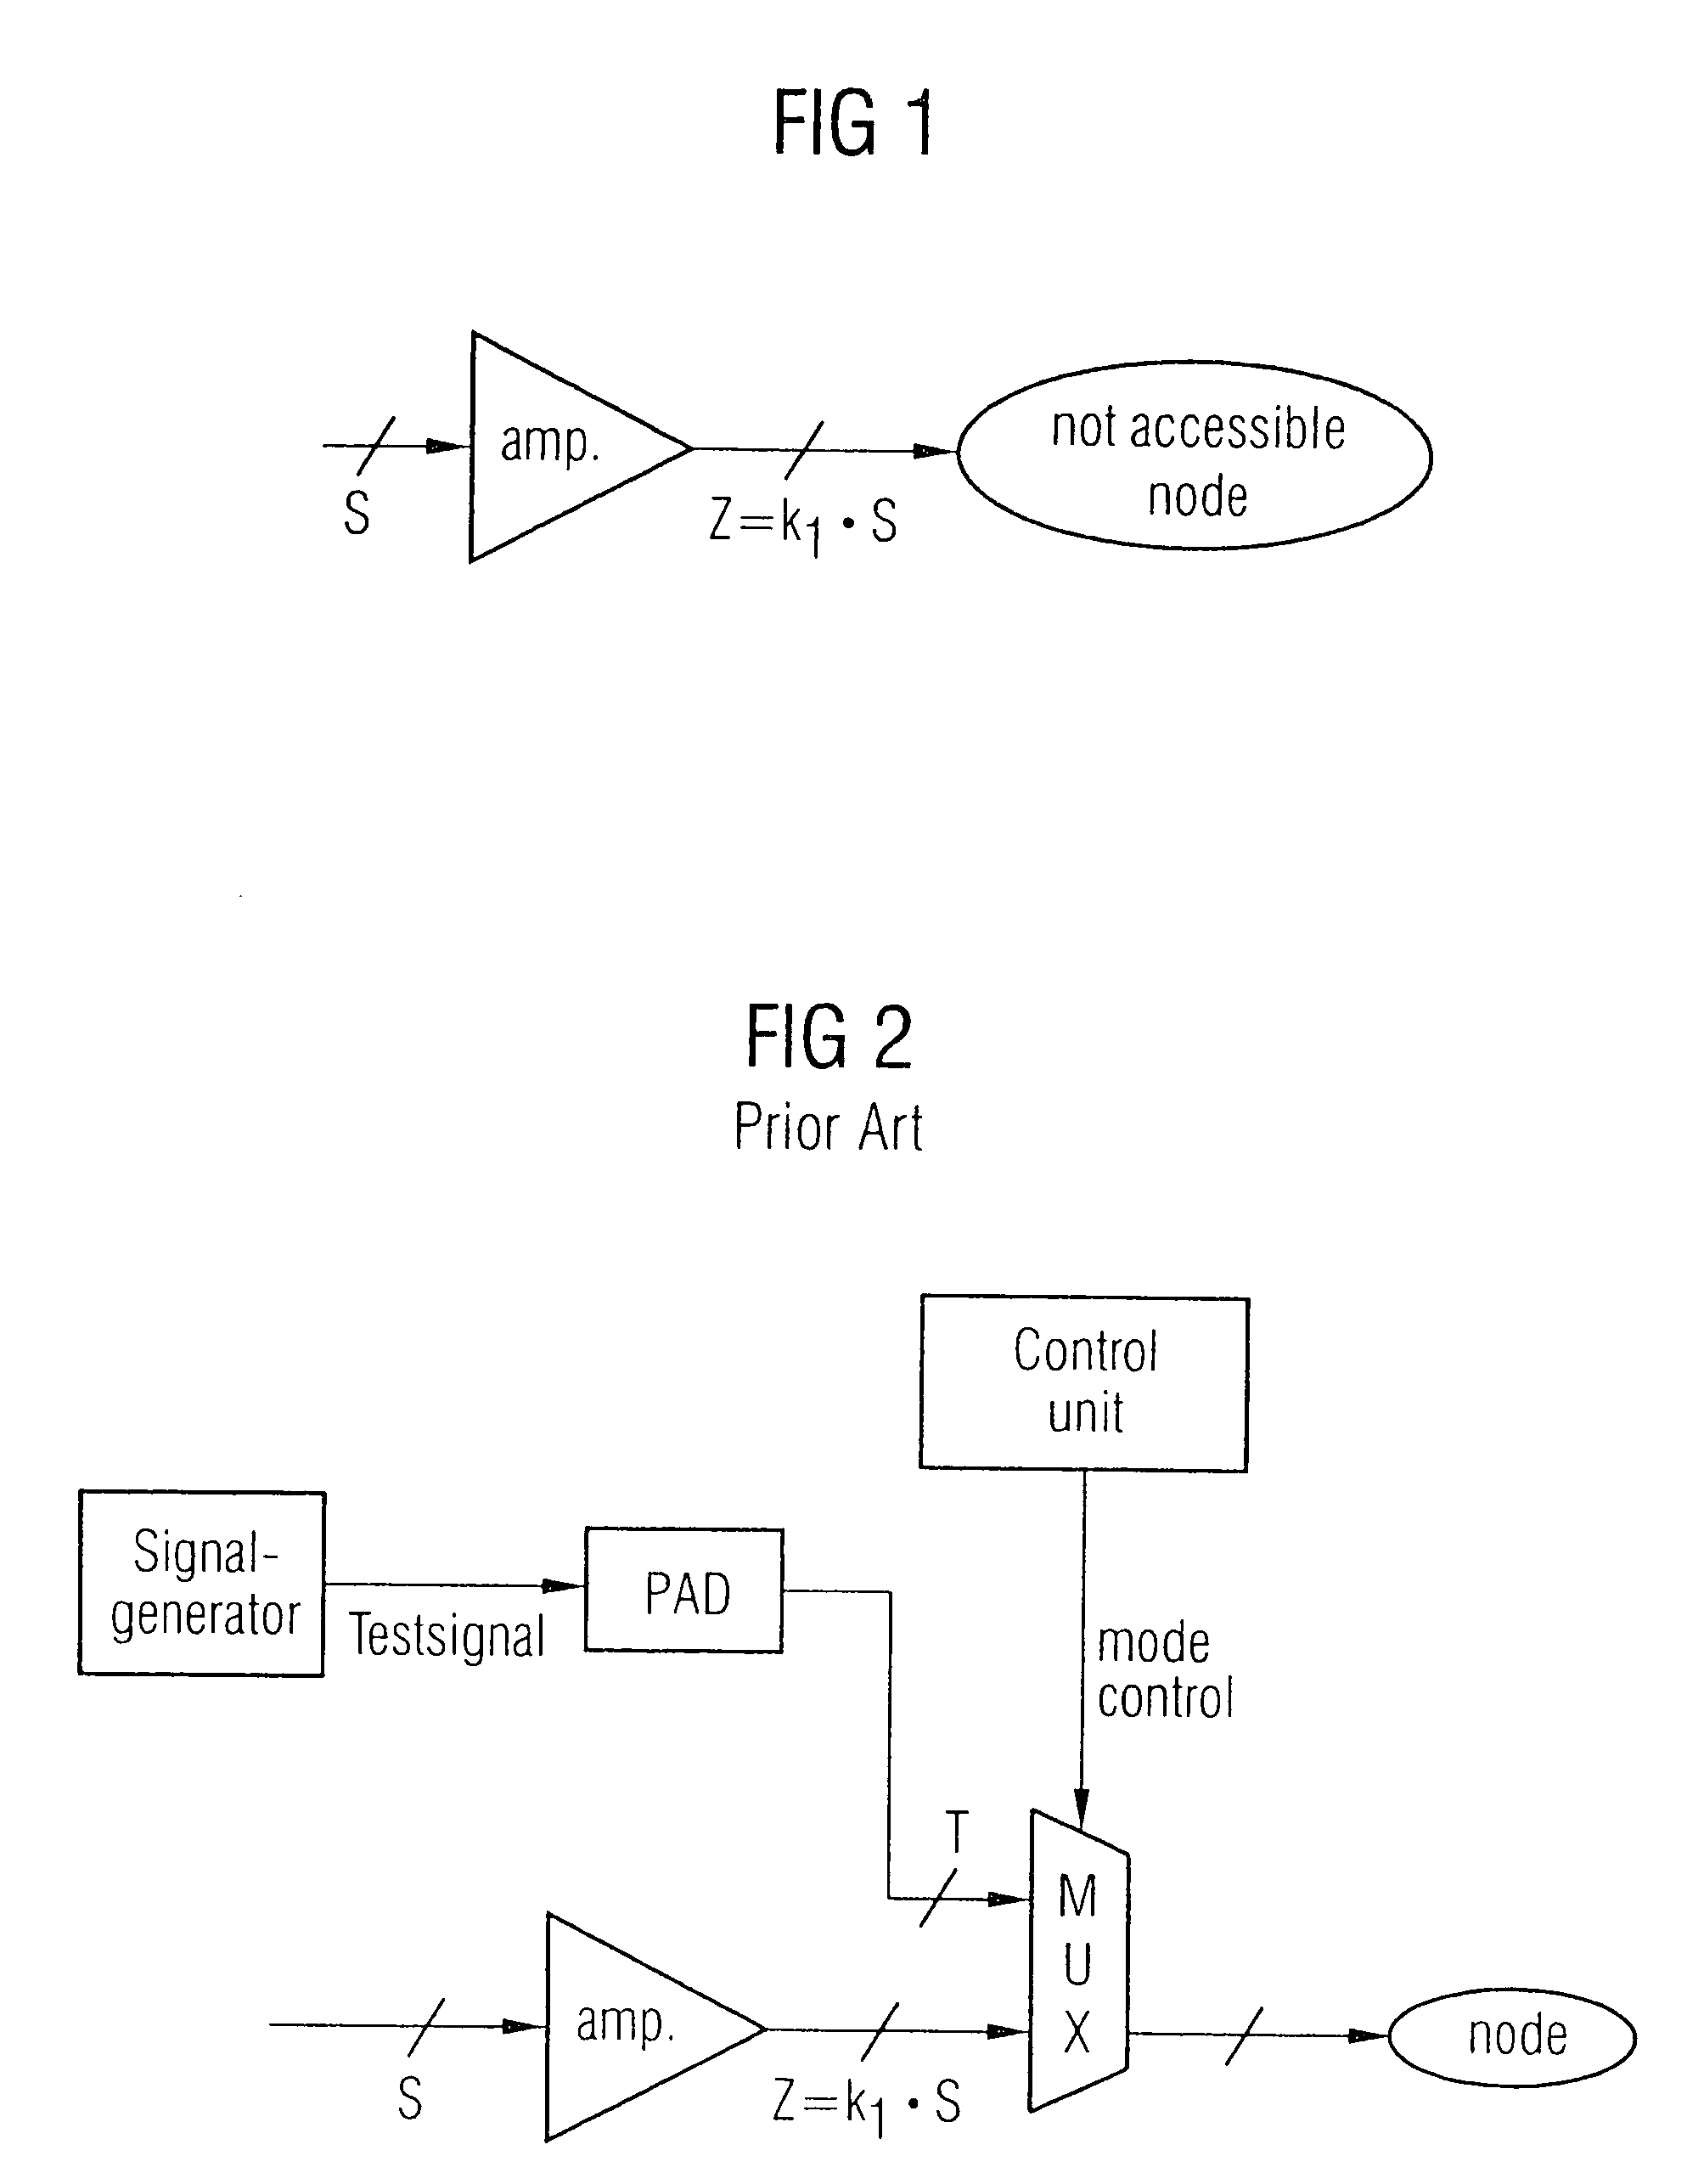 Analogue amplifier with multiplexing capability